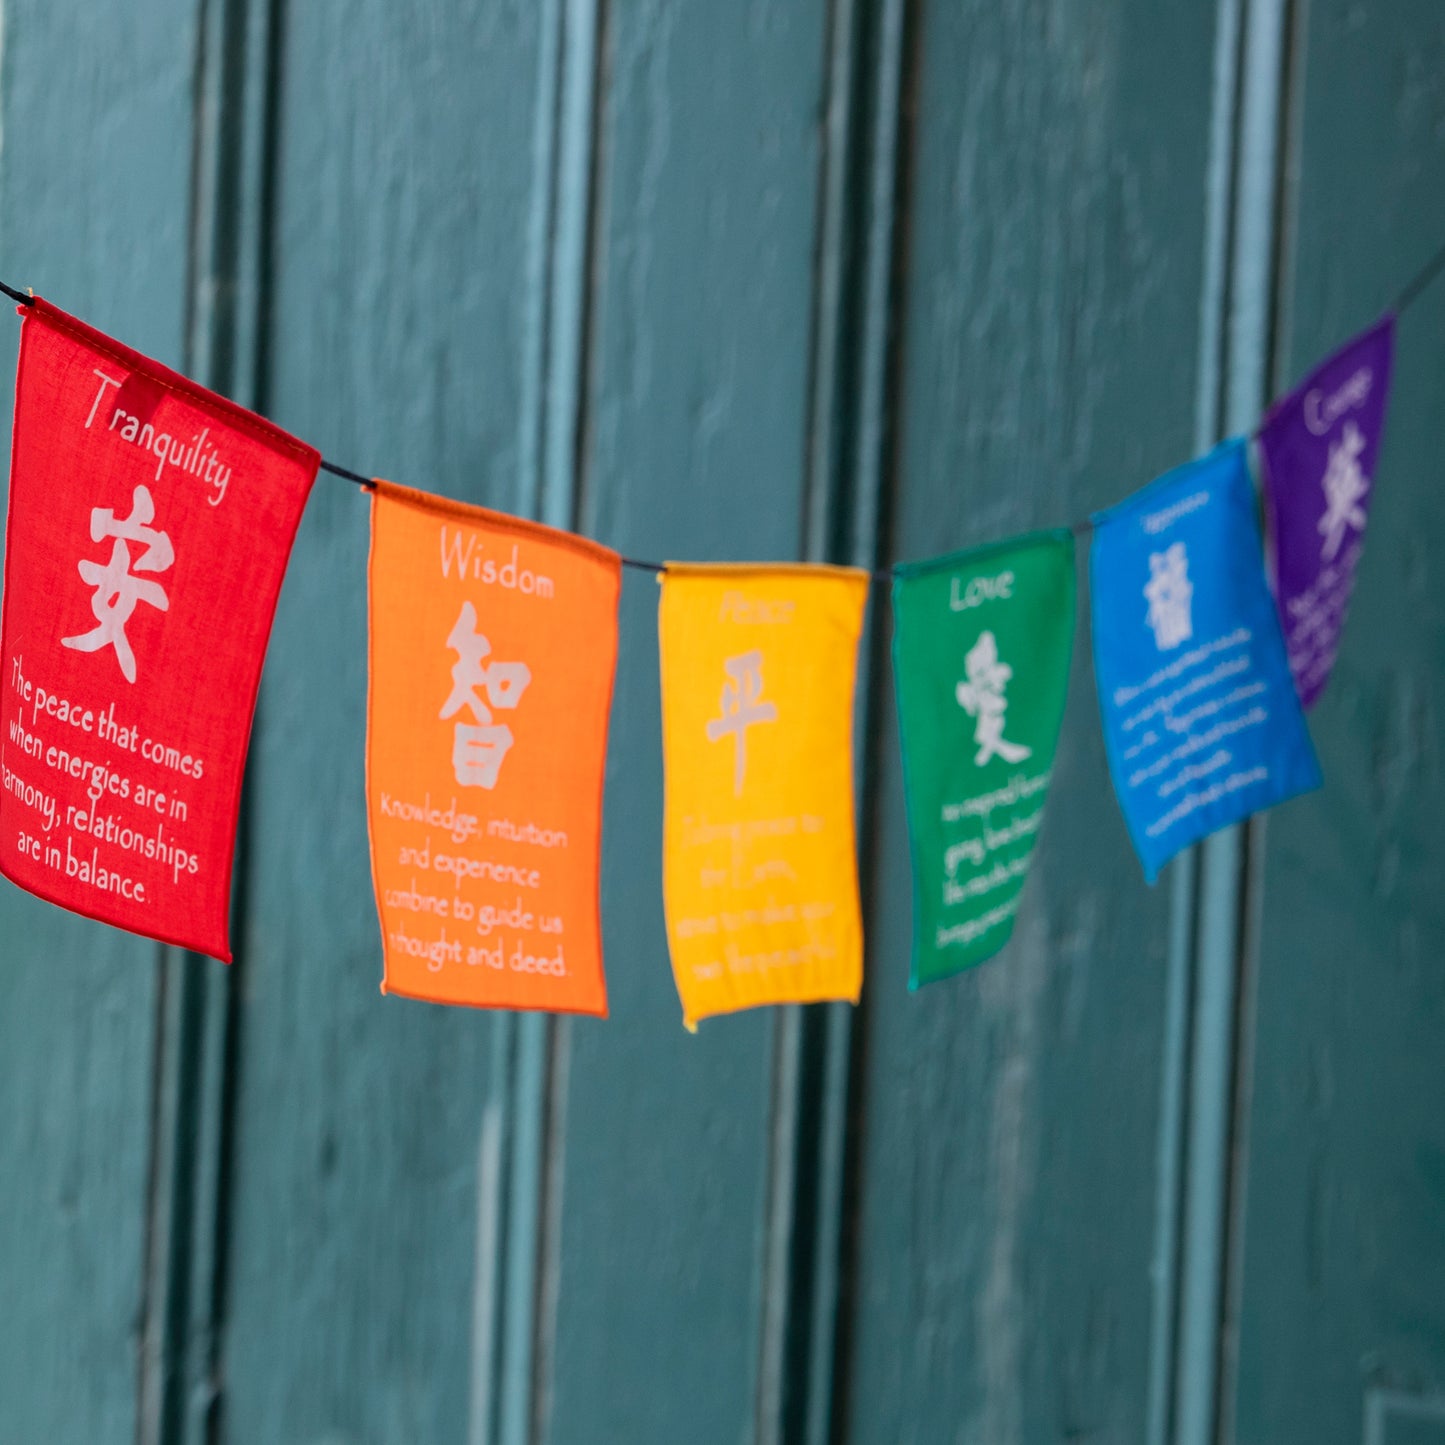 Small Prayer Flag in Bright Colors